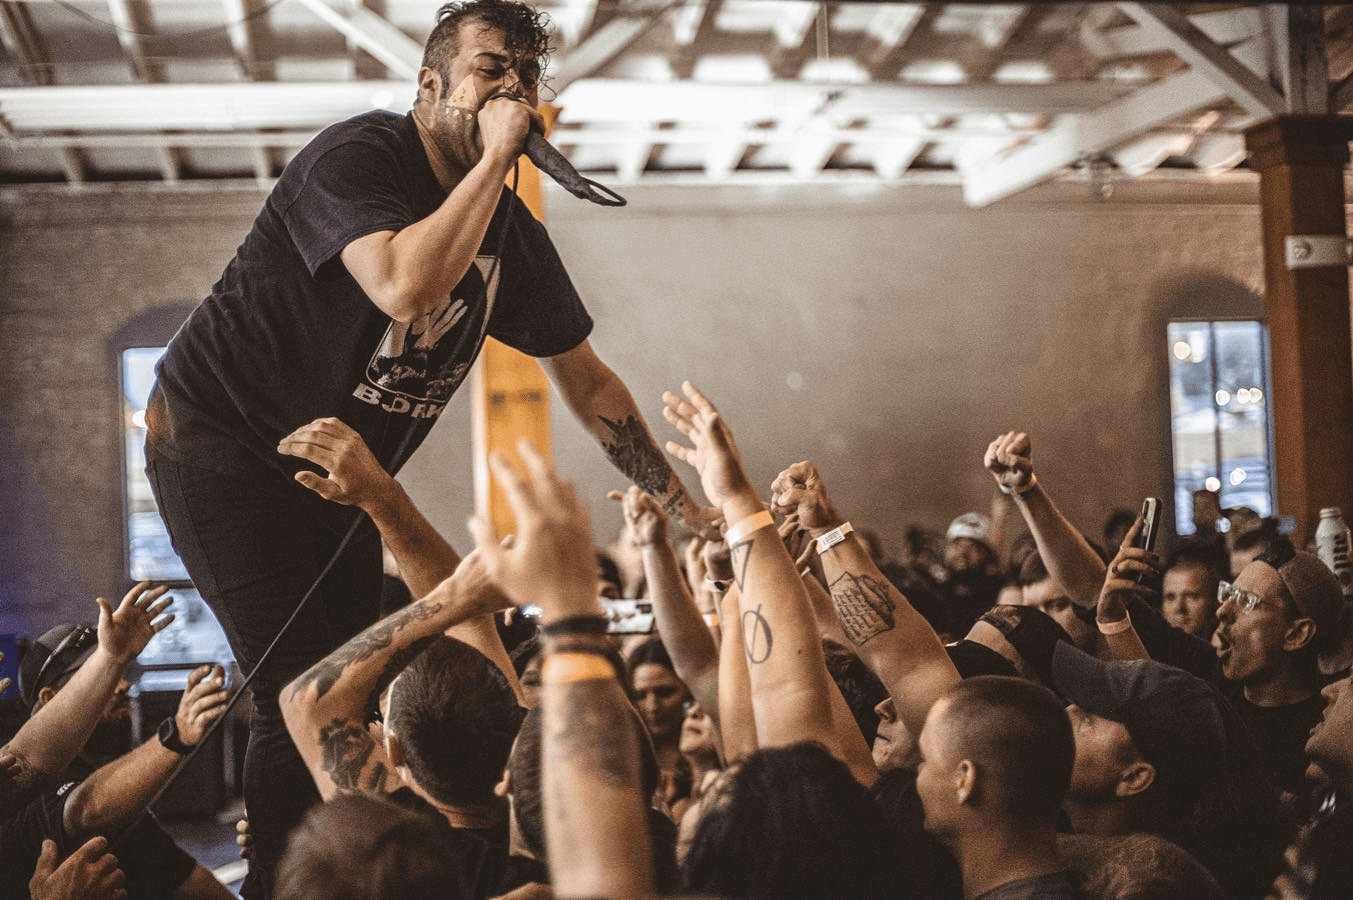 Interview with Mikey Carvajal of Islander